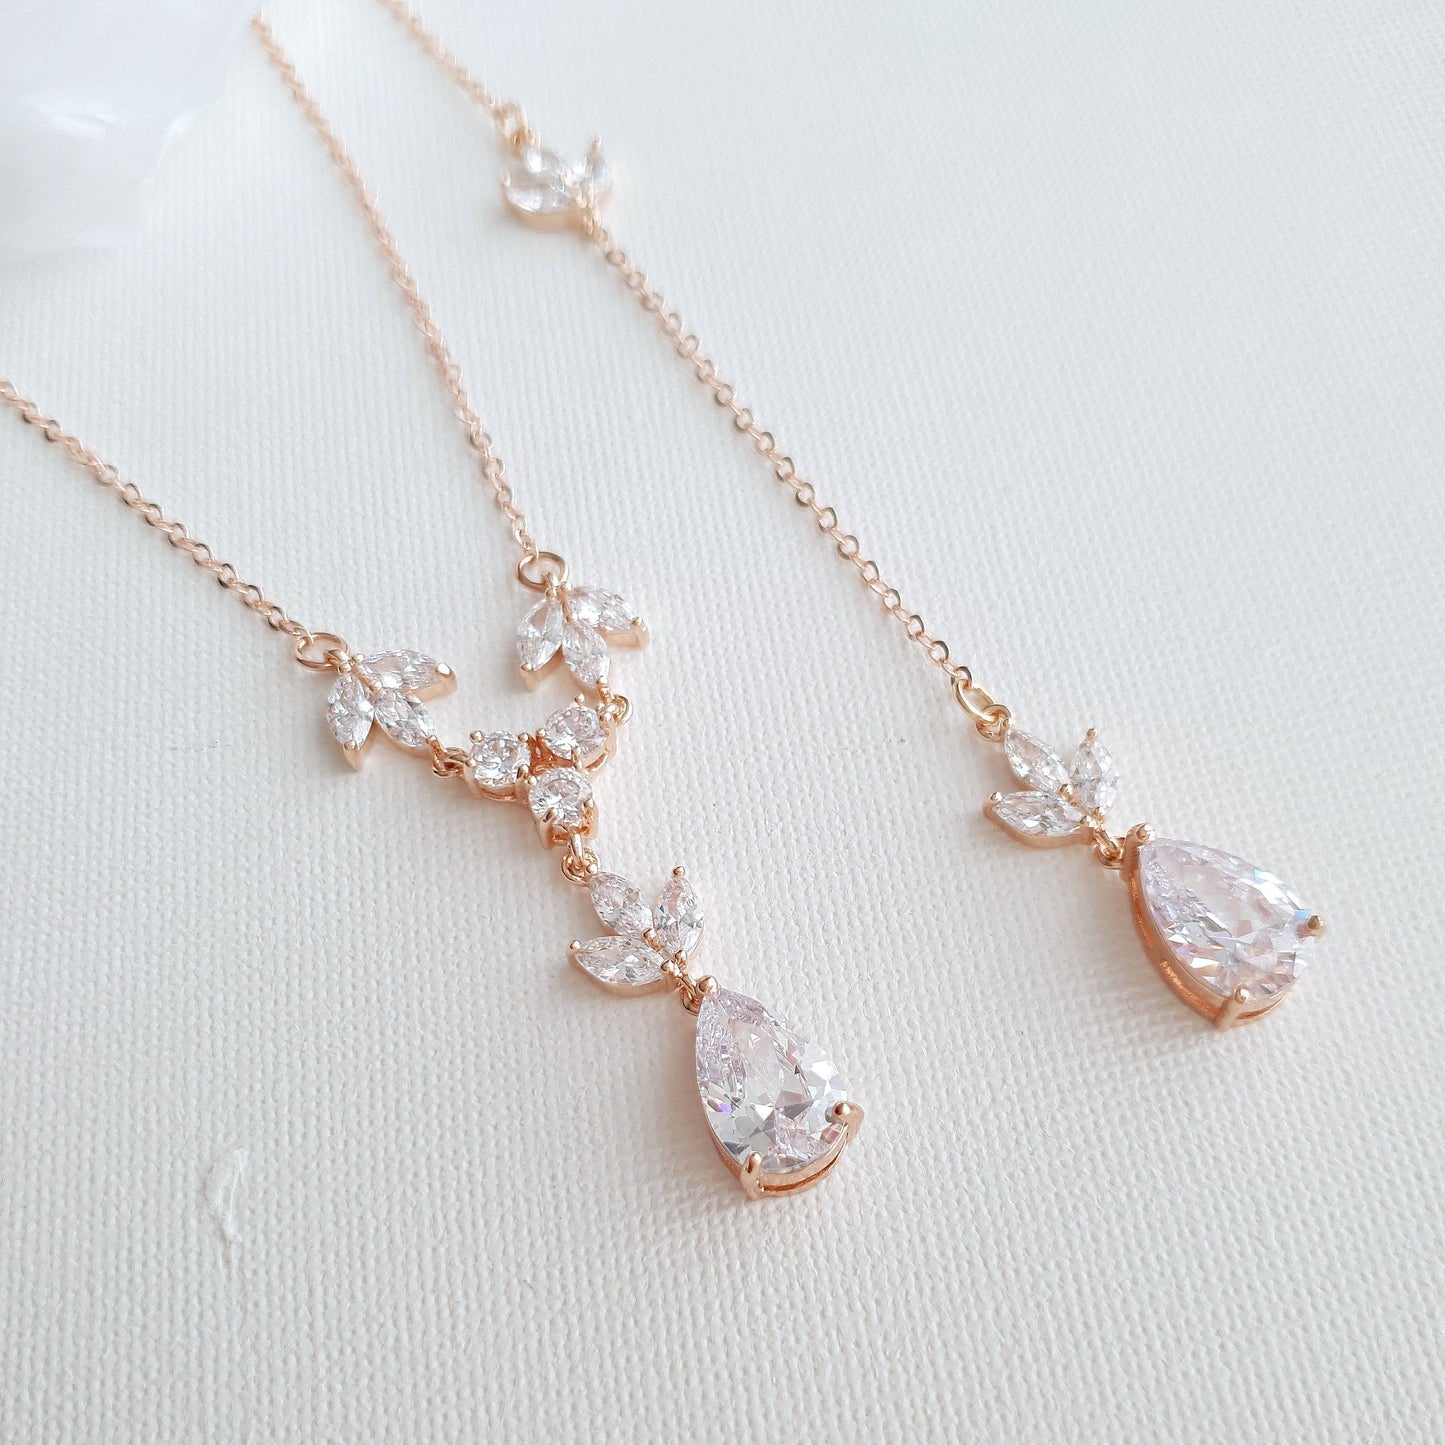 Jewelry Set for brides in Simple Design- Rose Gold- Leila - PoetryDesigns